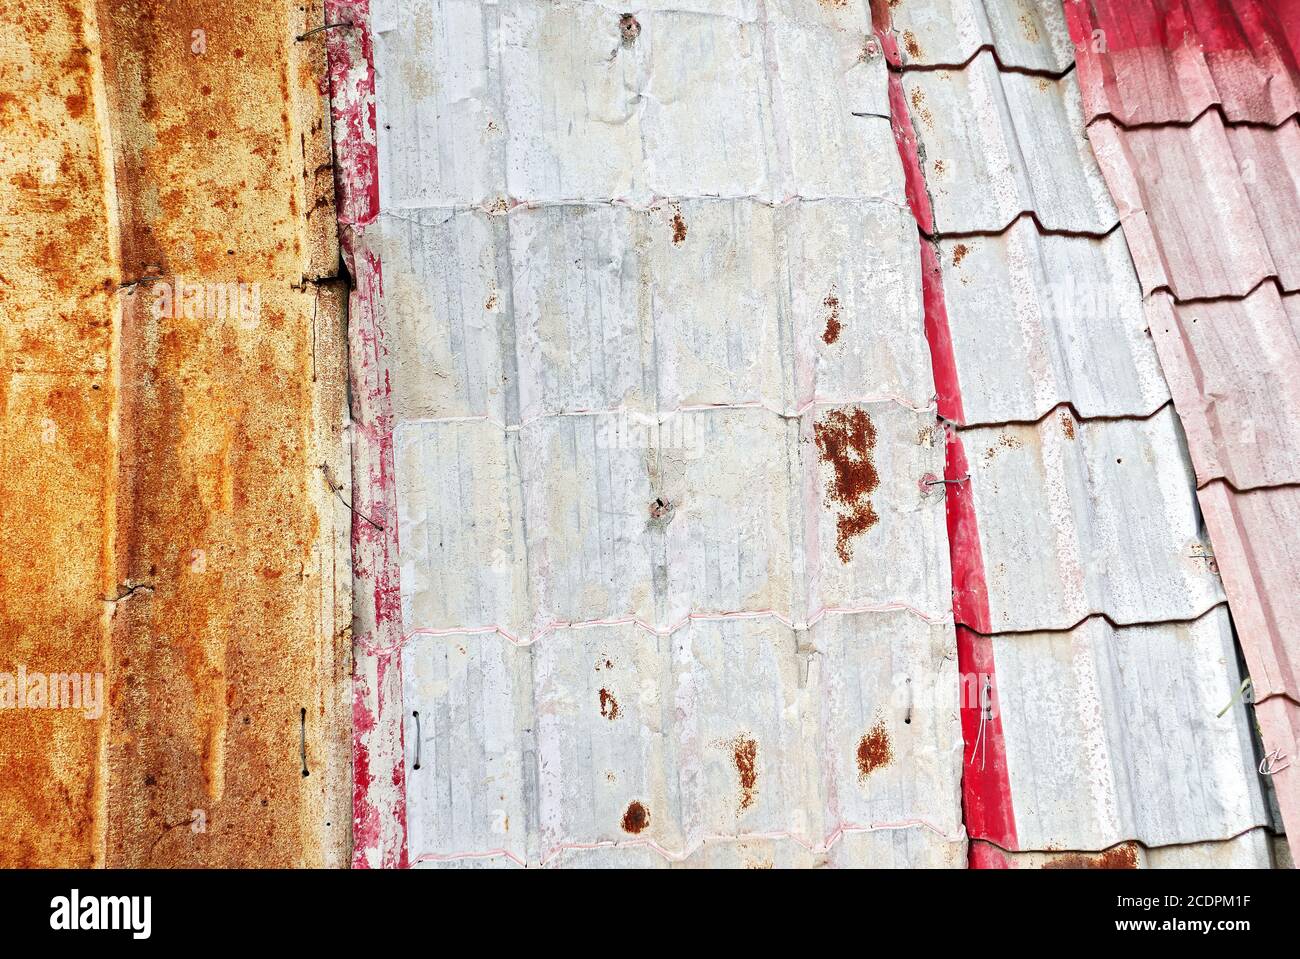 Detail view of old rusty and painted metal sheets used as roofing, held together with metal wire only, often seen in Asia Stock Photo